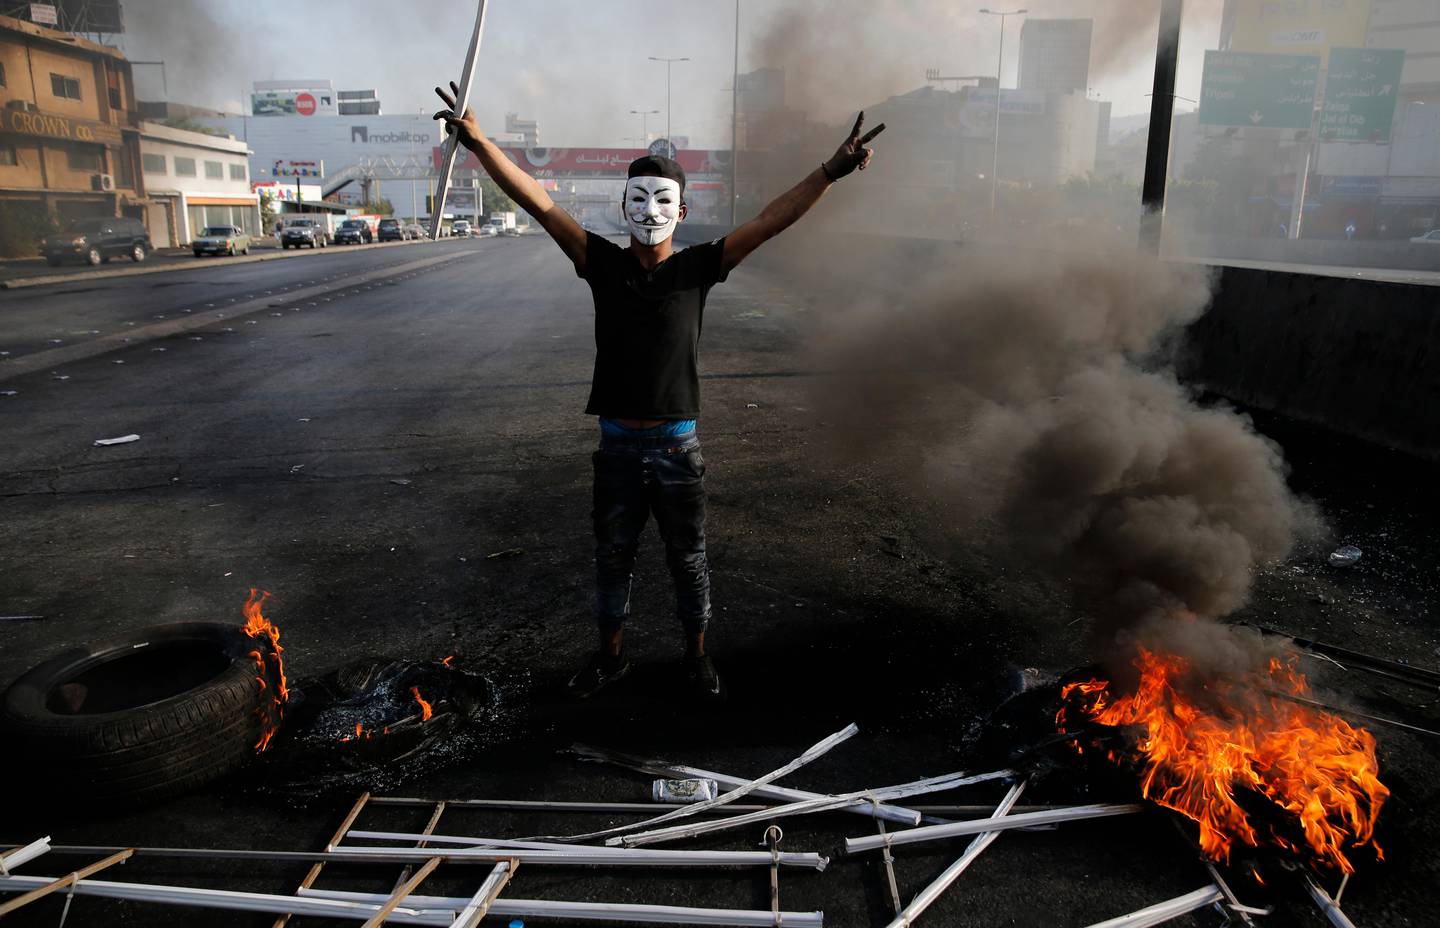 An anti-government protester flashes victory signs near burning tires as he blocks a highway that links to north Lebanon by burned tires, in east Beirut, Lebanon, Sunday, Oct. 20, 2019. Protests erupted in Lebanon after the government proposed new taxes criticized for hitting low income groups the hardest. (AP Photo/Hussein Malla)